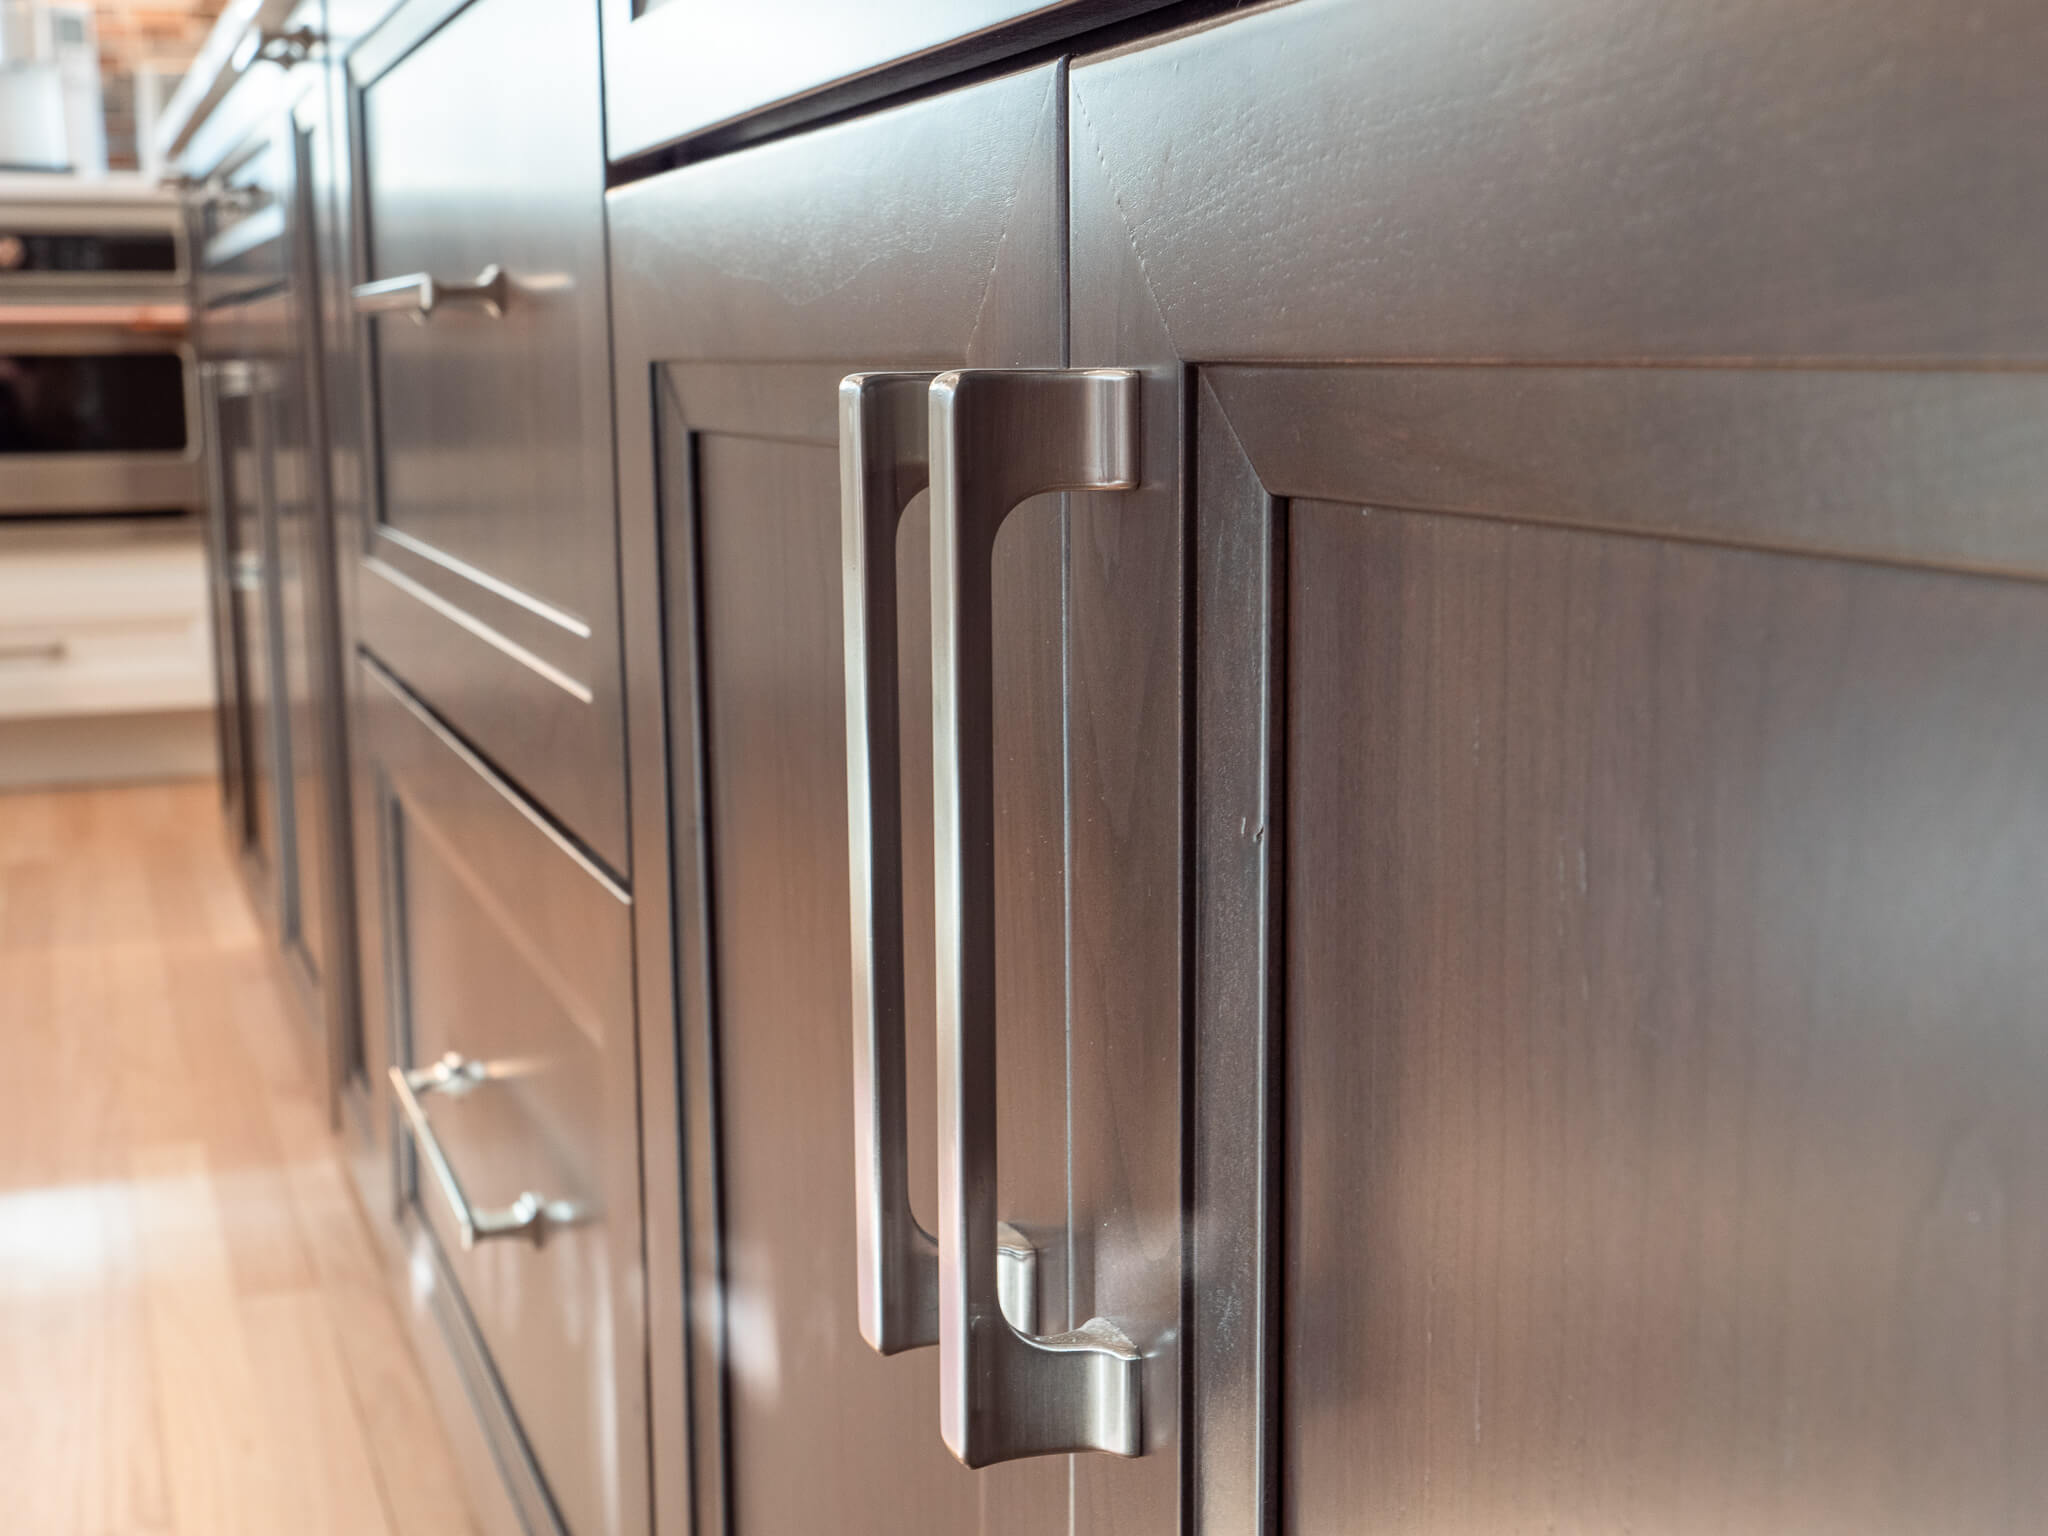 close up view of the dark cabinets